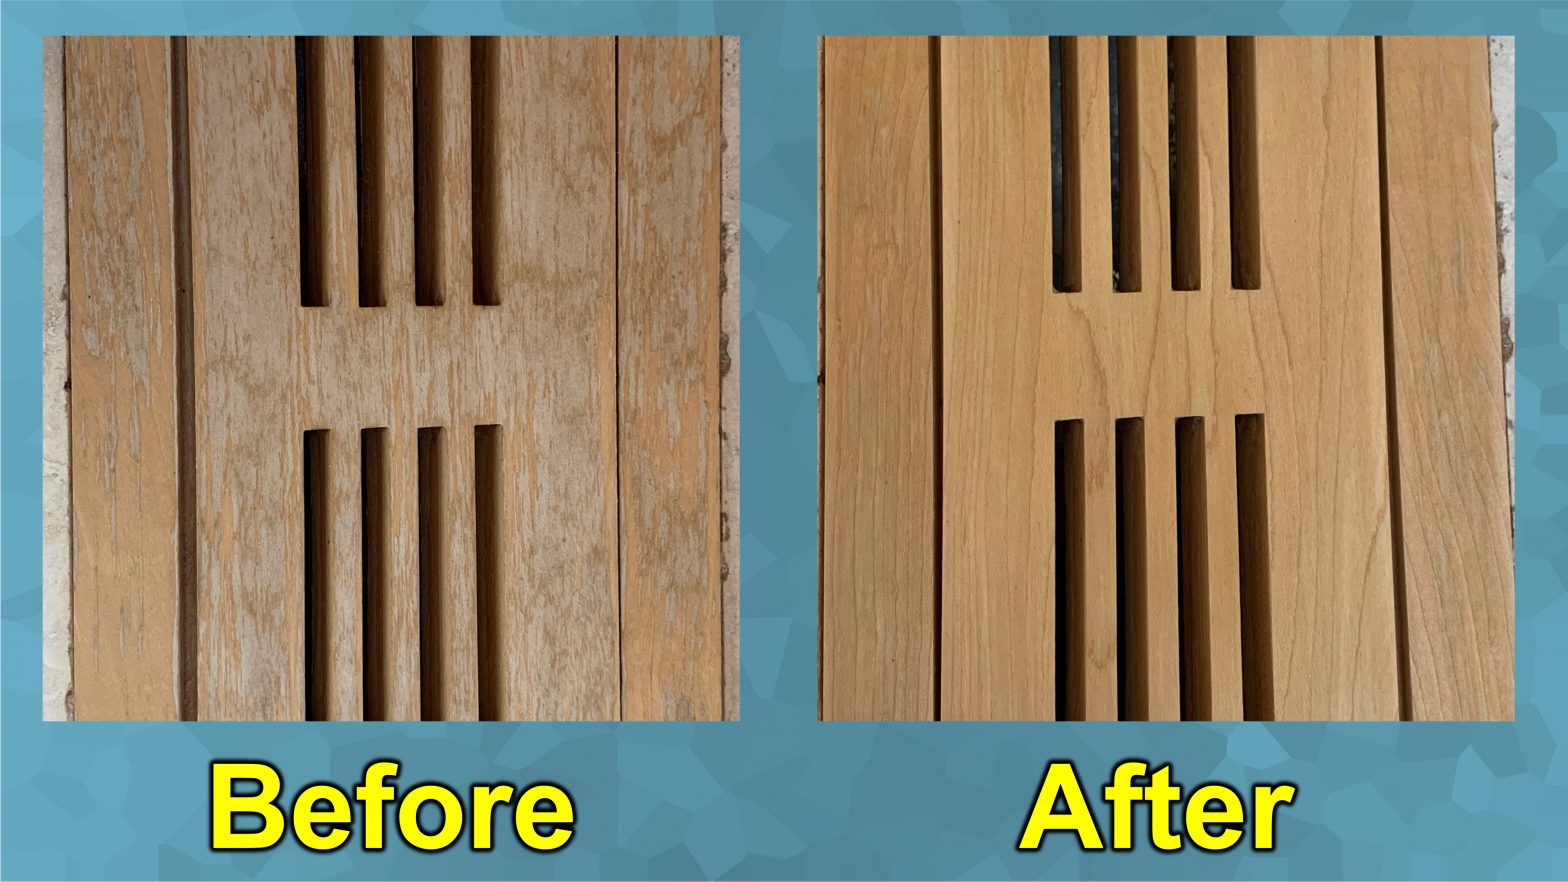 Refinish a wood floor register cover to make it look new again; Simple DIY project